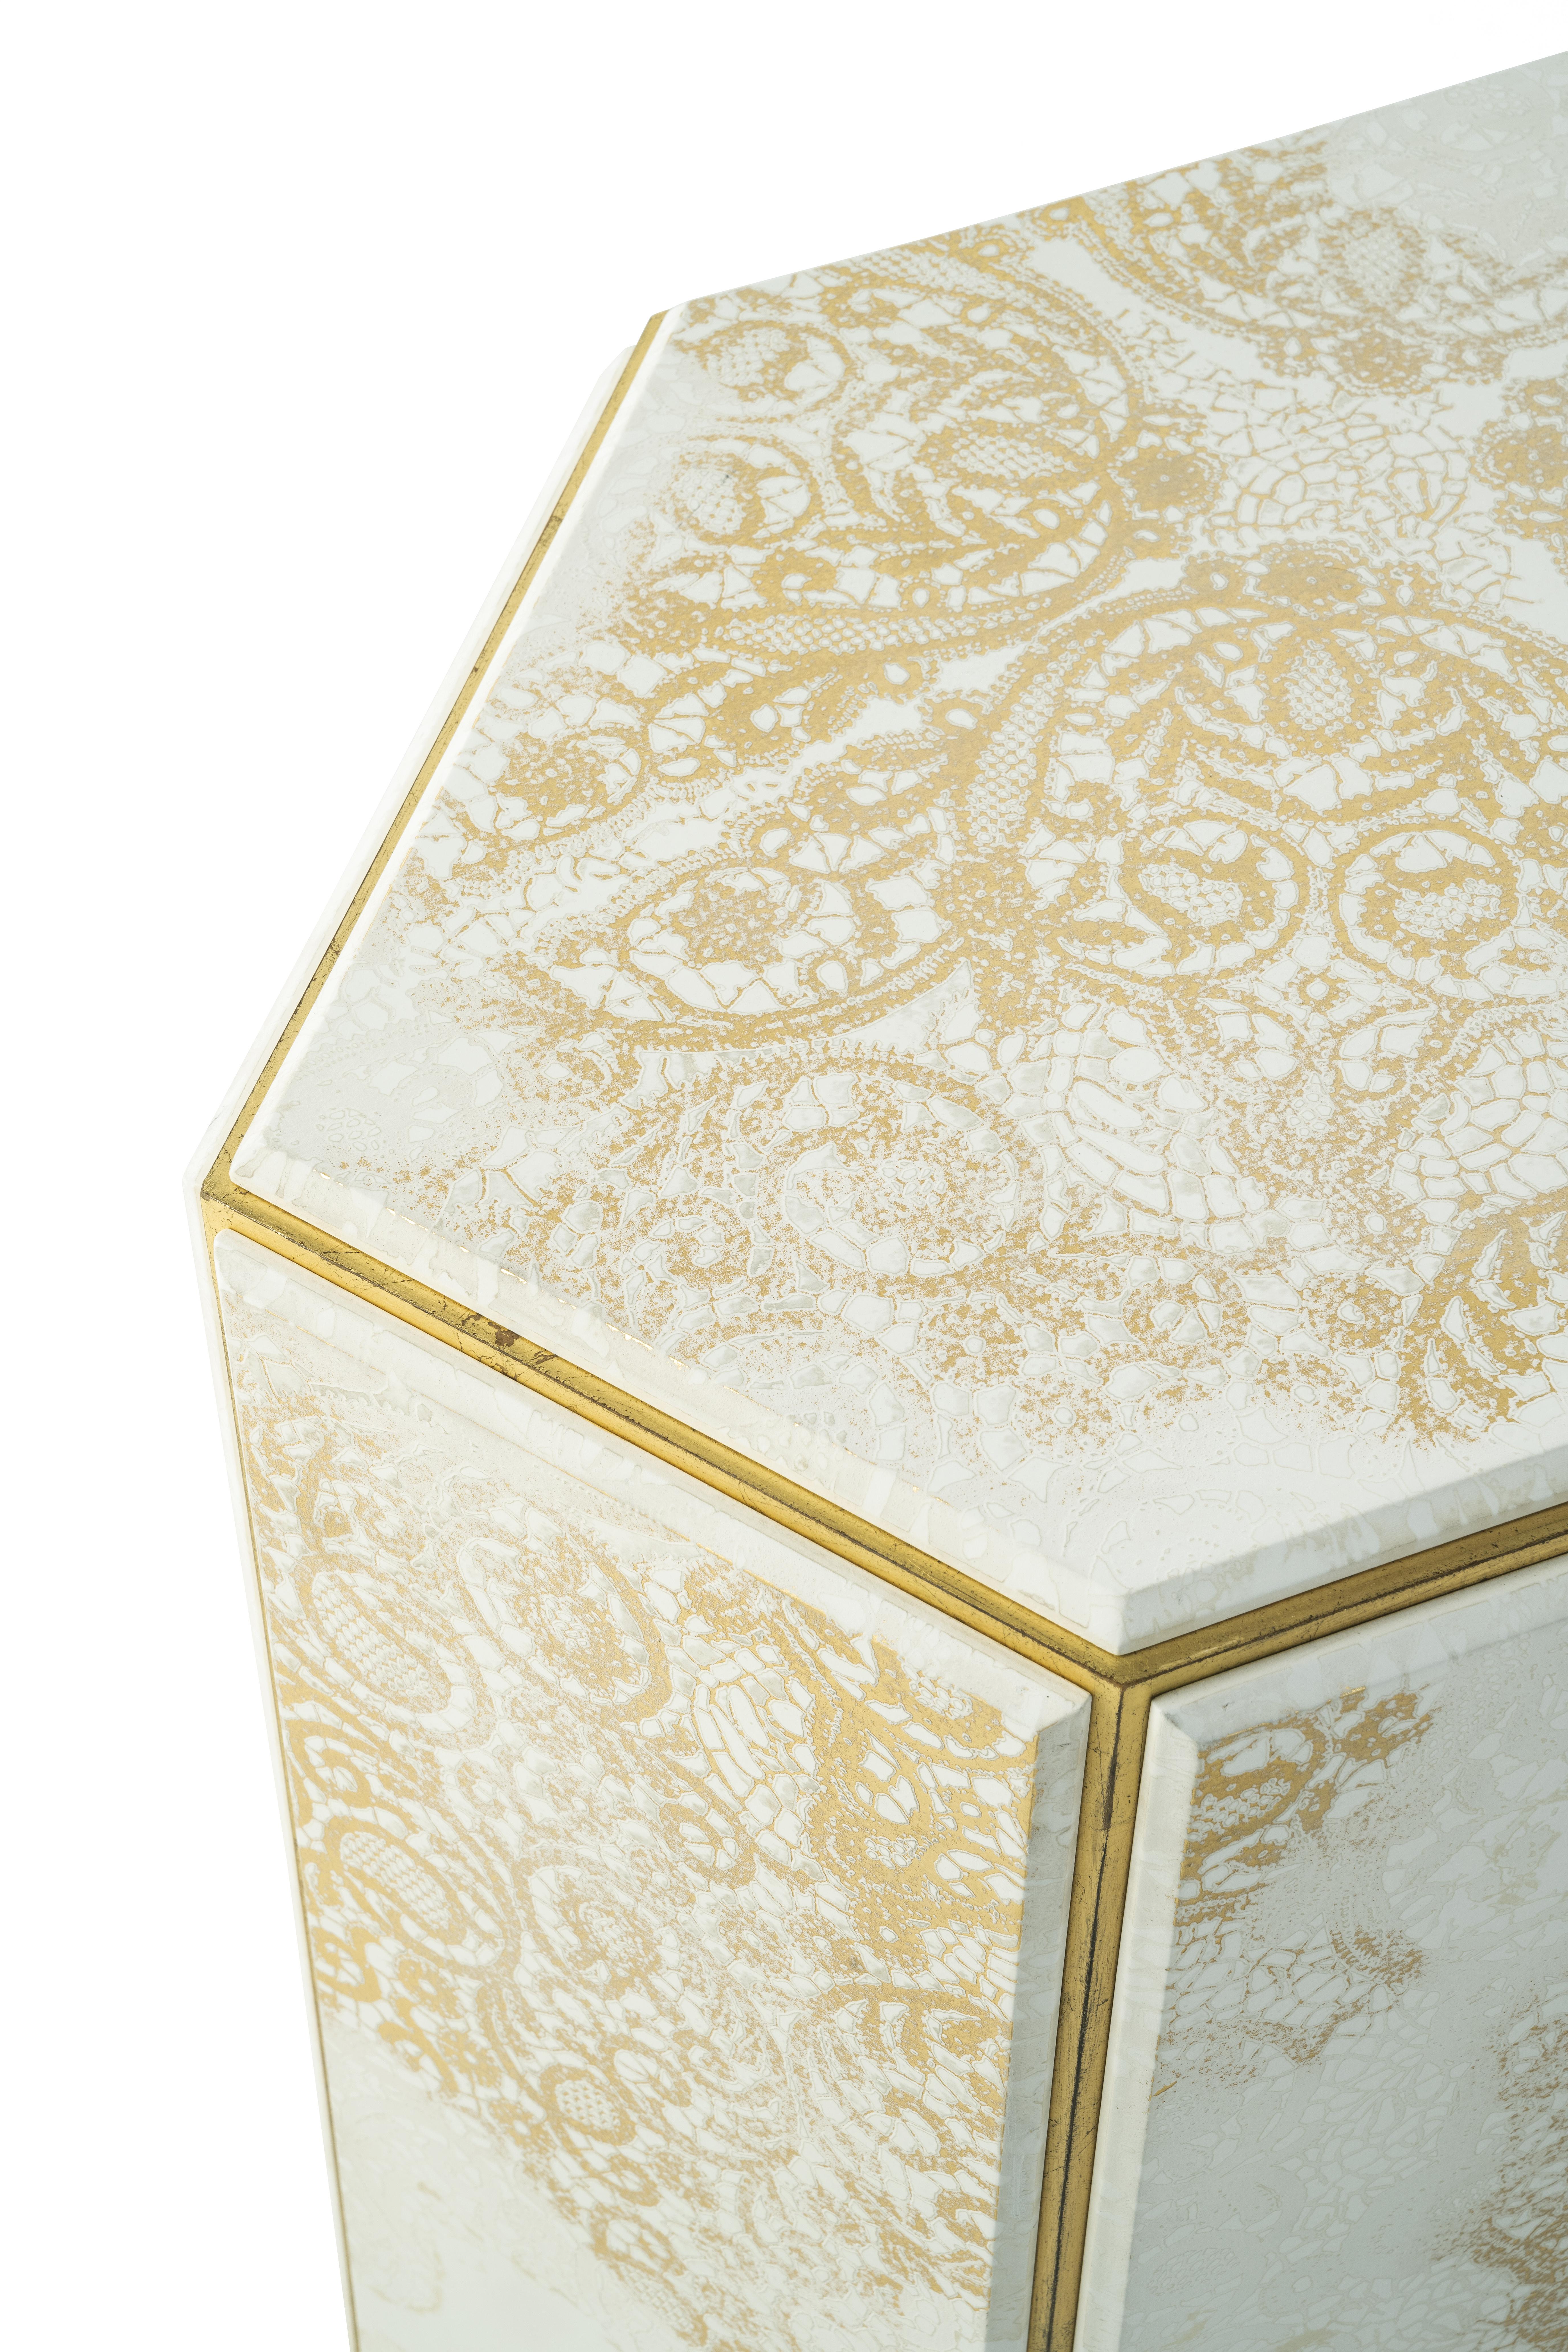 Italian 21st Century Très Jolie Low Table with Gold Leaf Laser Engraved Lace  For Sale